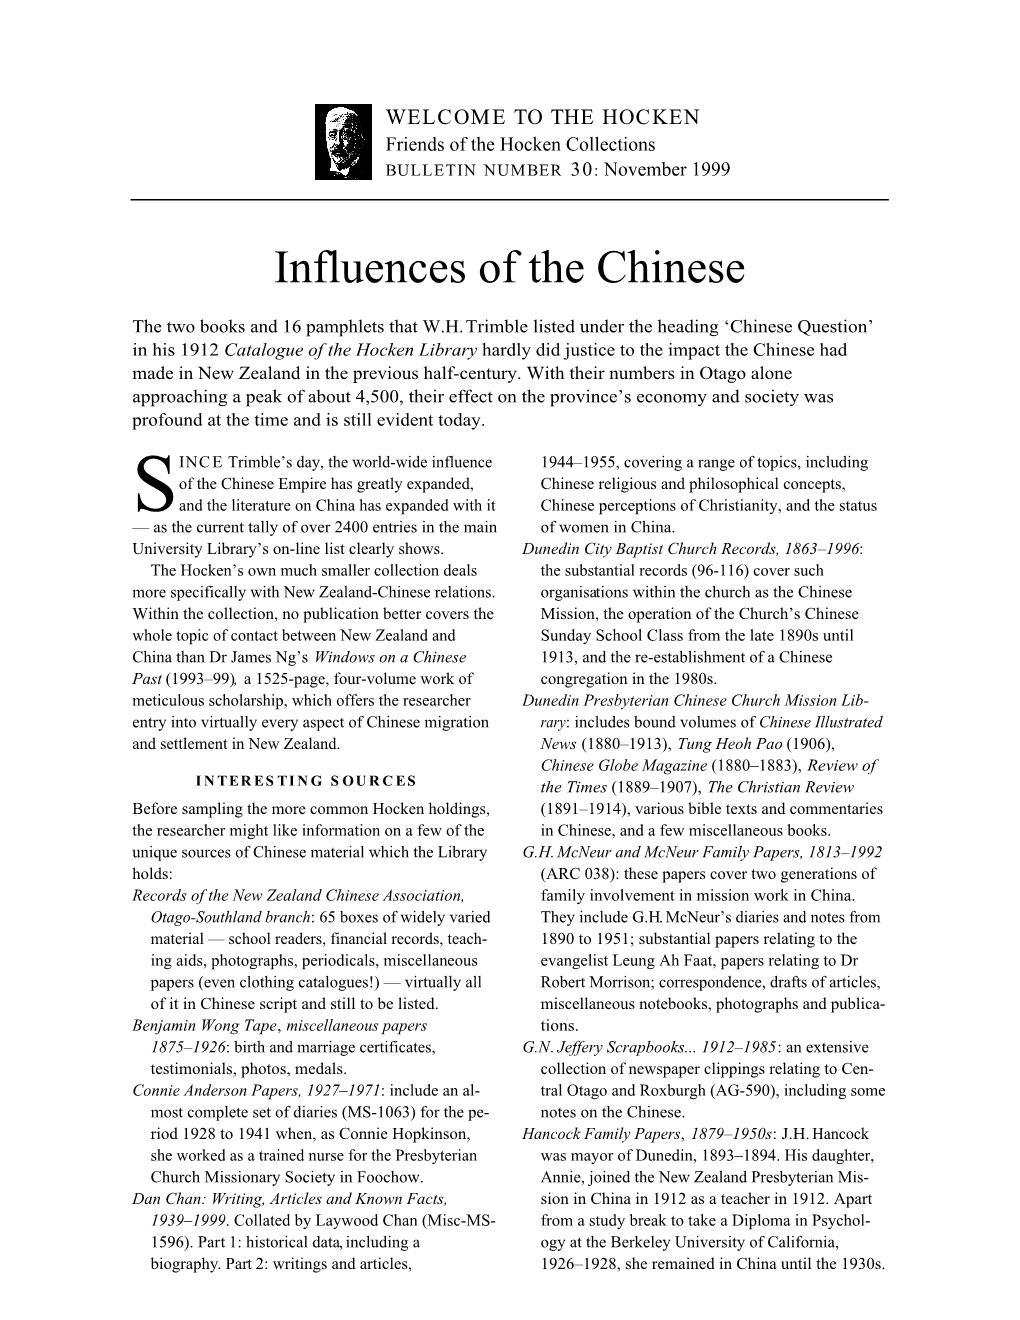 Influences of the Chinese